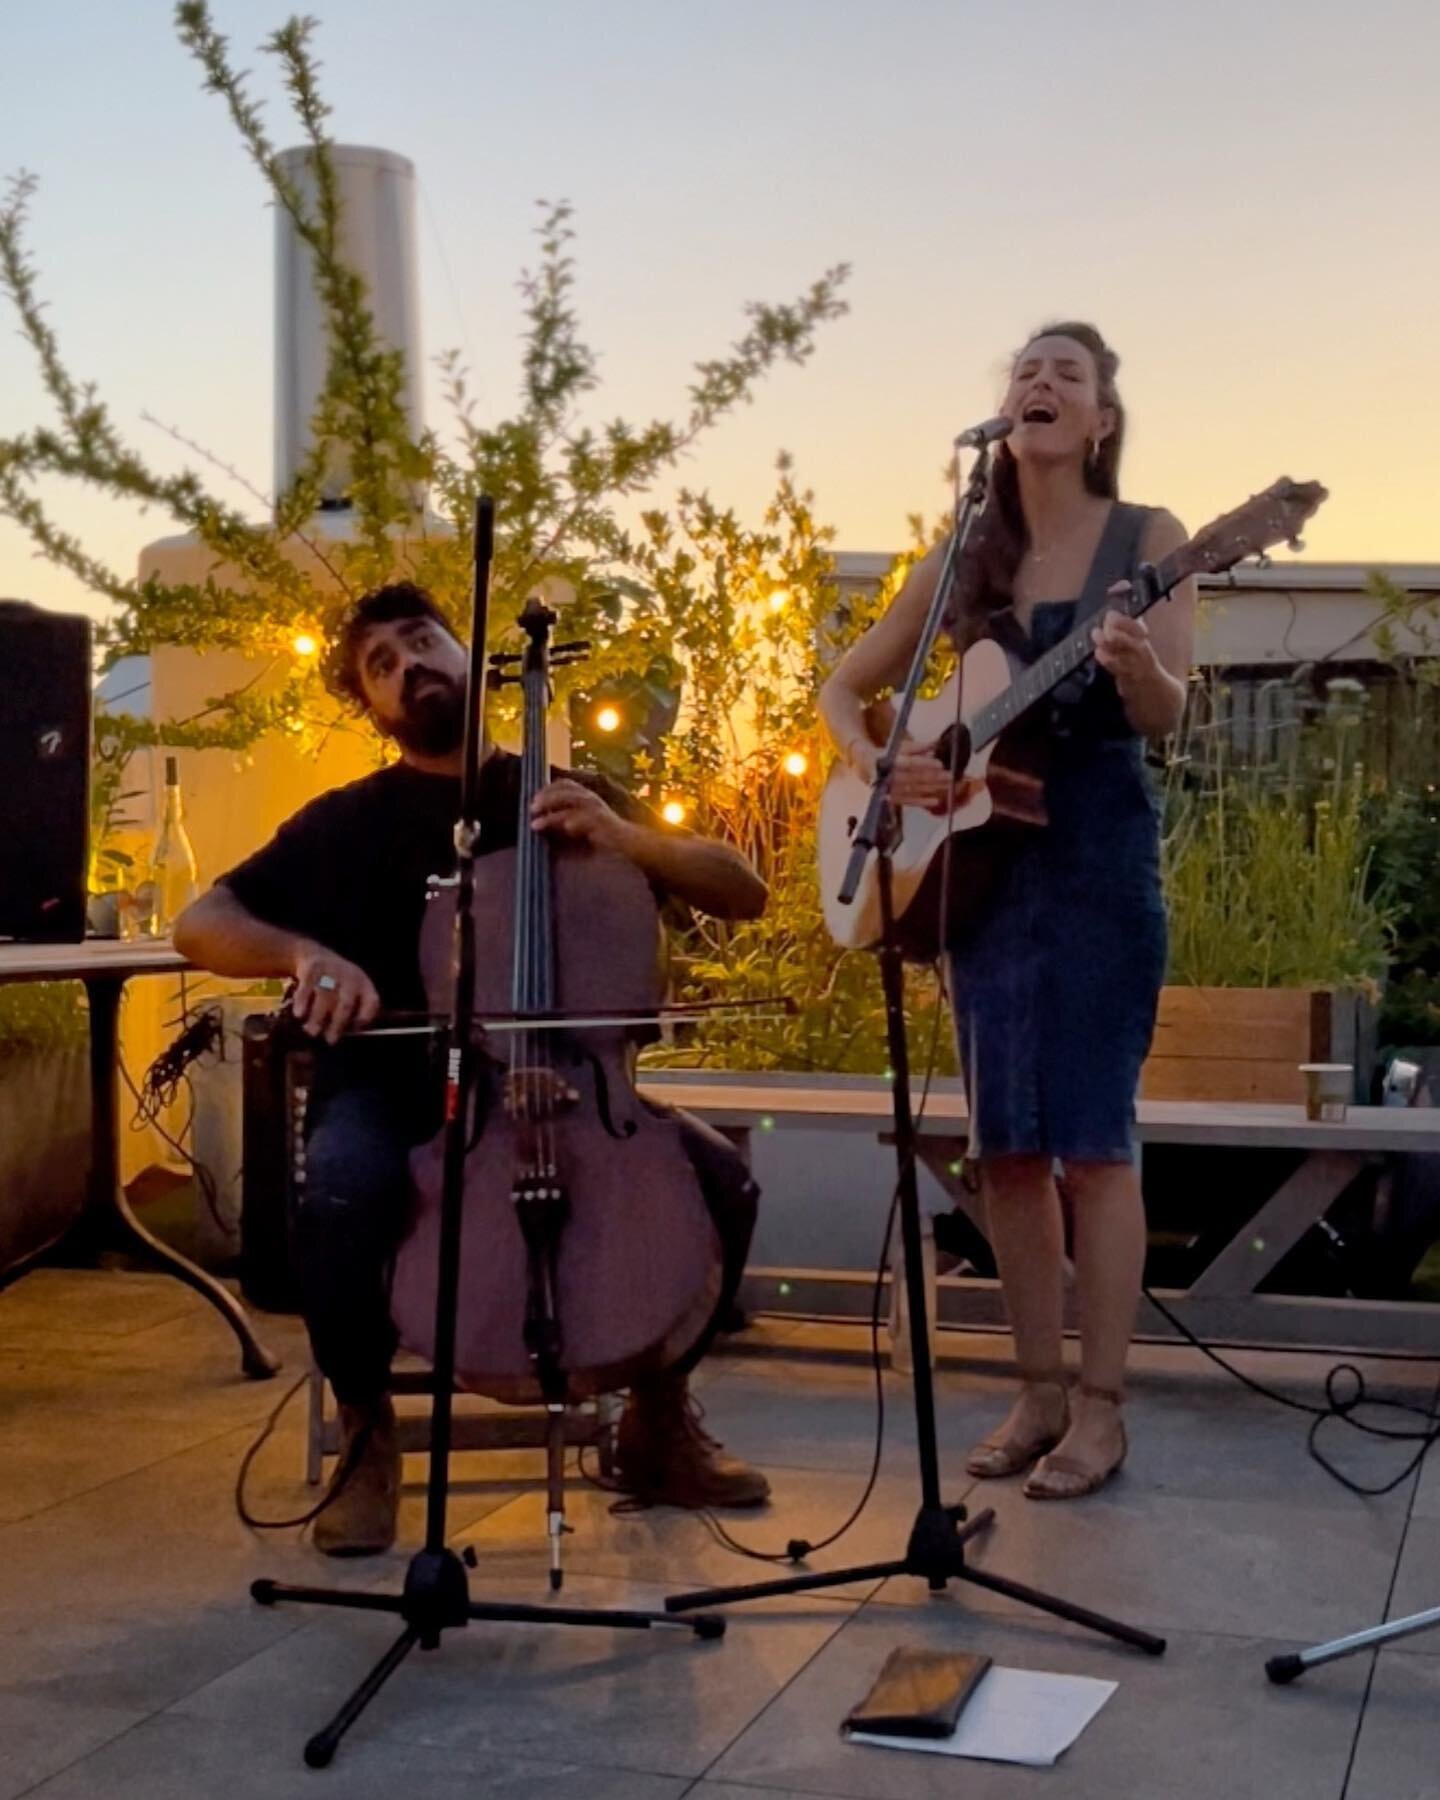 Last night on a Brooklyn rooftop with @hawthorne_the_band 
💗
The company, the weather, the music&hellip;it was all just perfect. Thanks to all who made it out &amp; @egeriksen for capturing these shots for us. 
Summer is here, y&rsquo;all. Let&rsquo